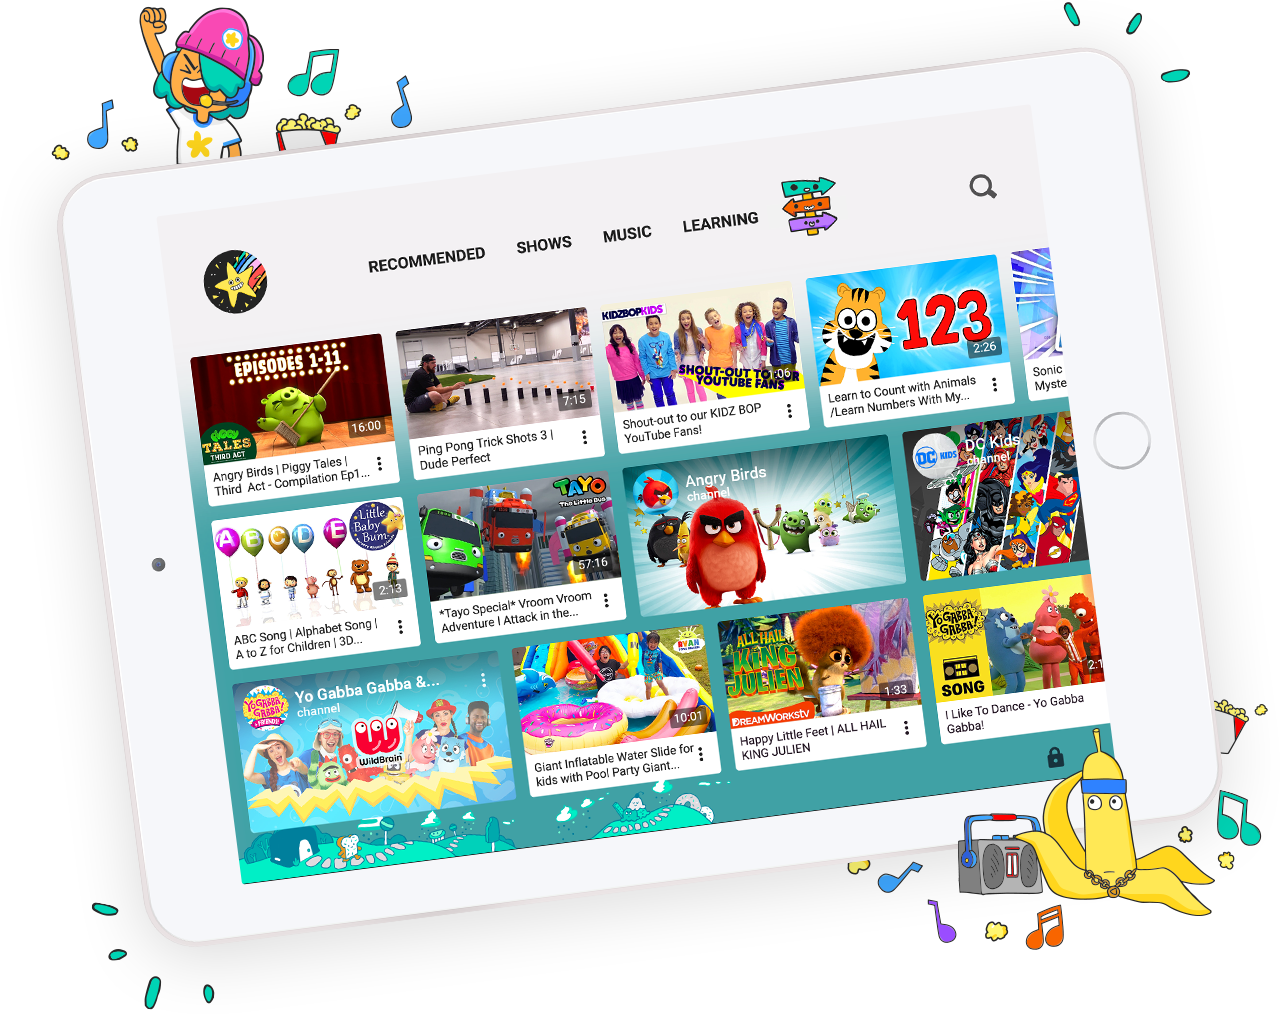 YouTube for Kids gets revamped with individual profiles, tailored UI, and more